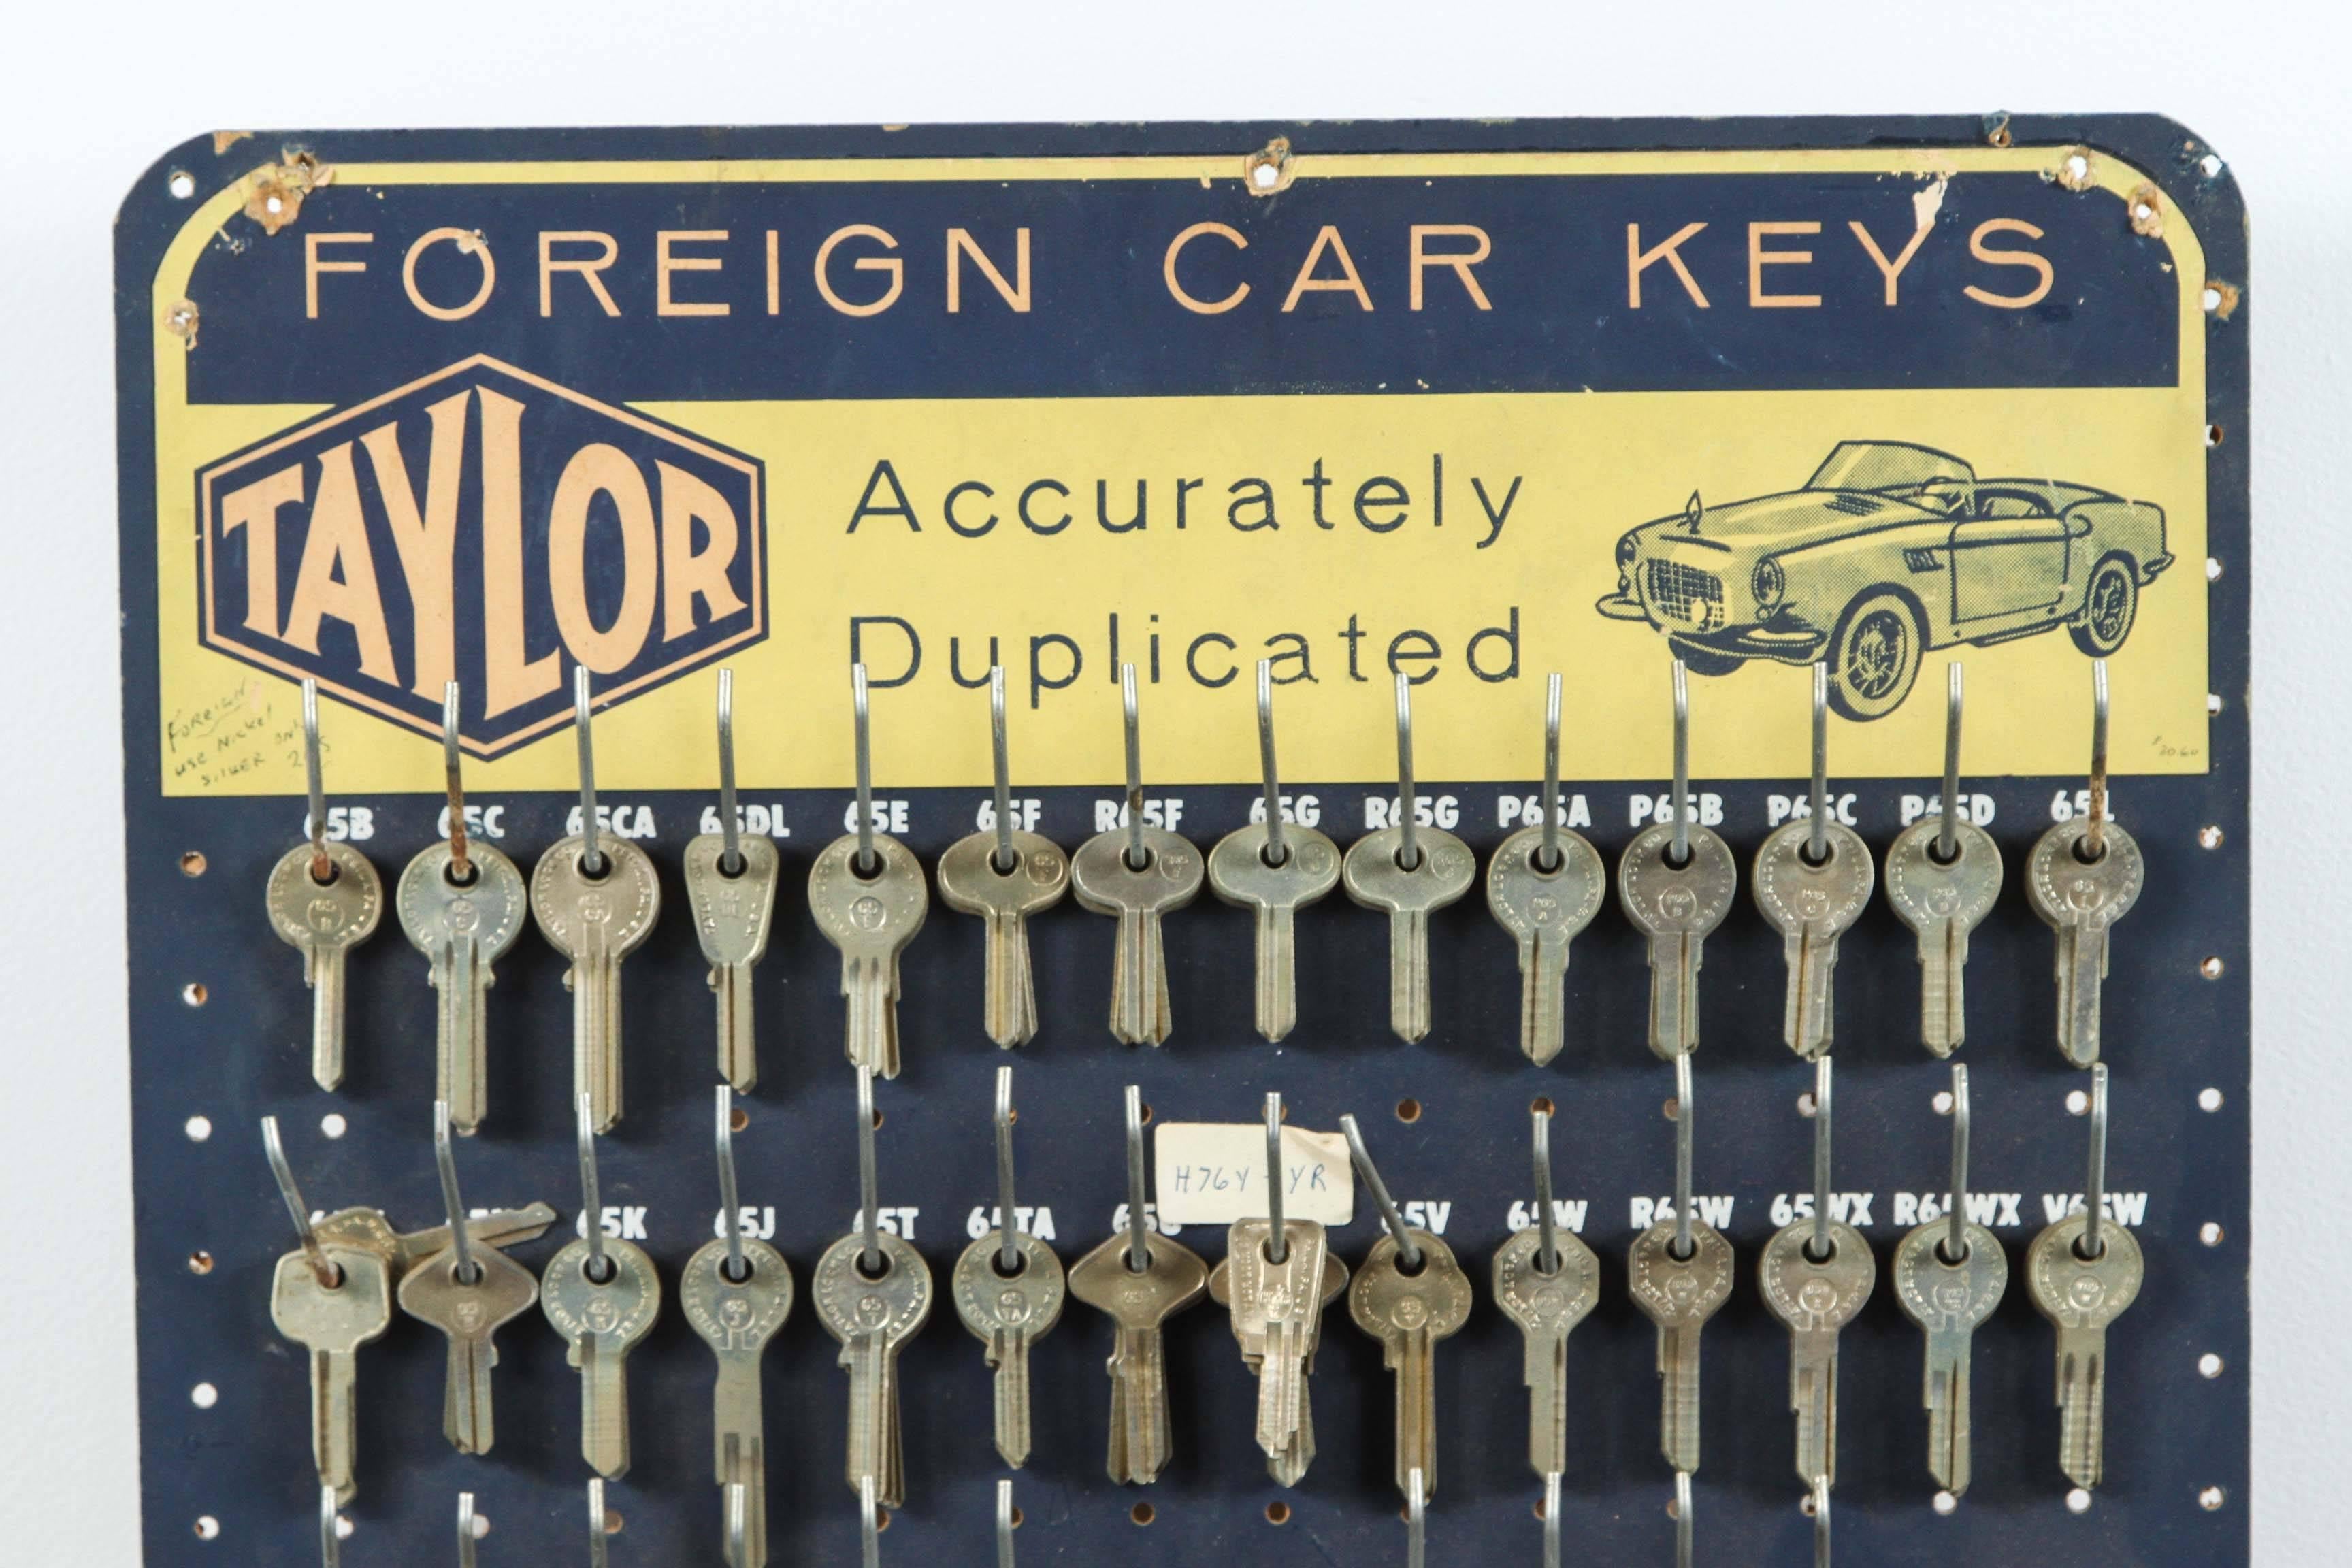 Manufactured by Taylor Key Company in Philadelphia for Mid-Century American hardware stores. Great obsessive and repetitive collection. Hooks mounted to peg board. Handwritten notes on board.